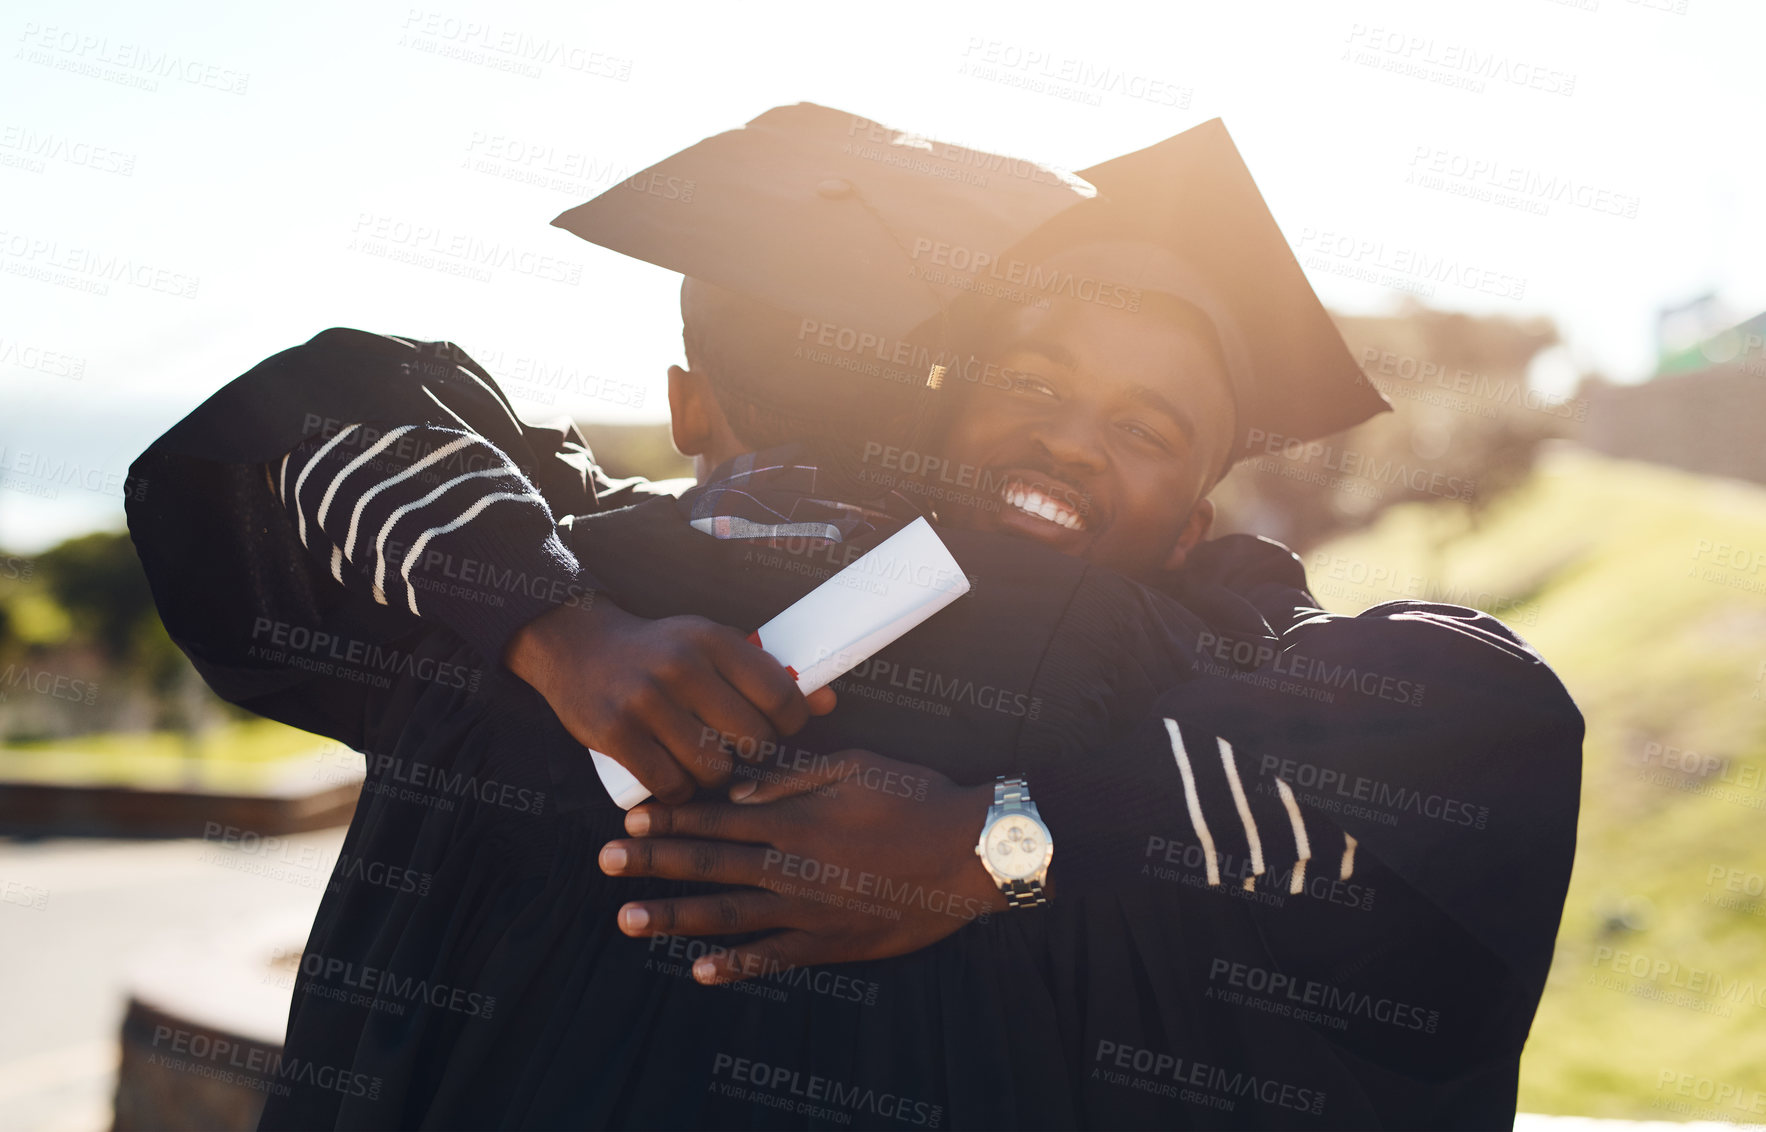 Buy stock photo Shot of two happy young students hugging each other on graduation day